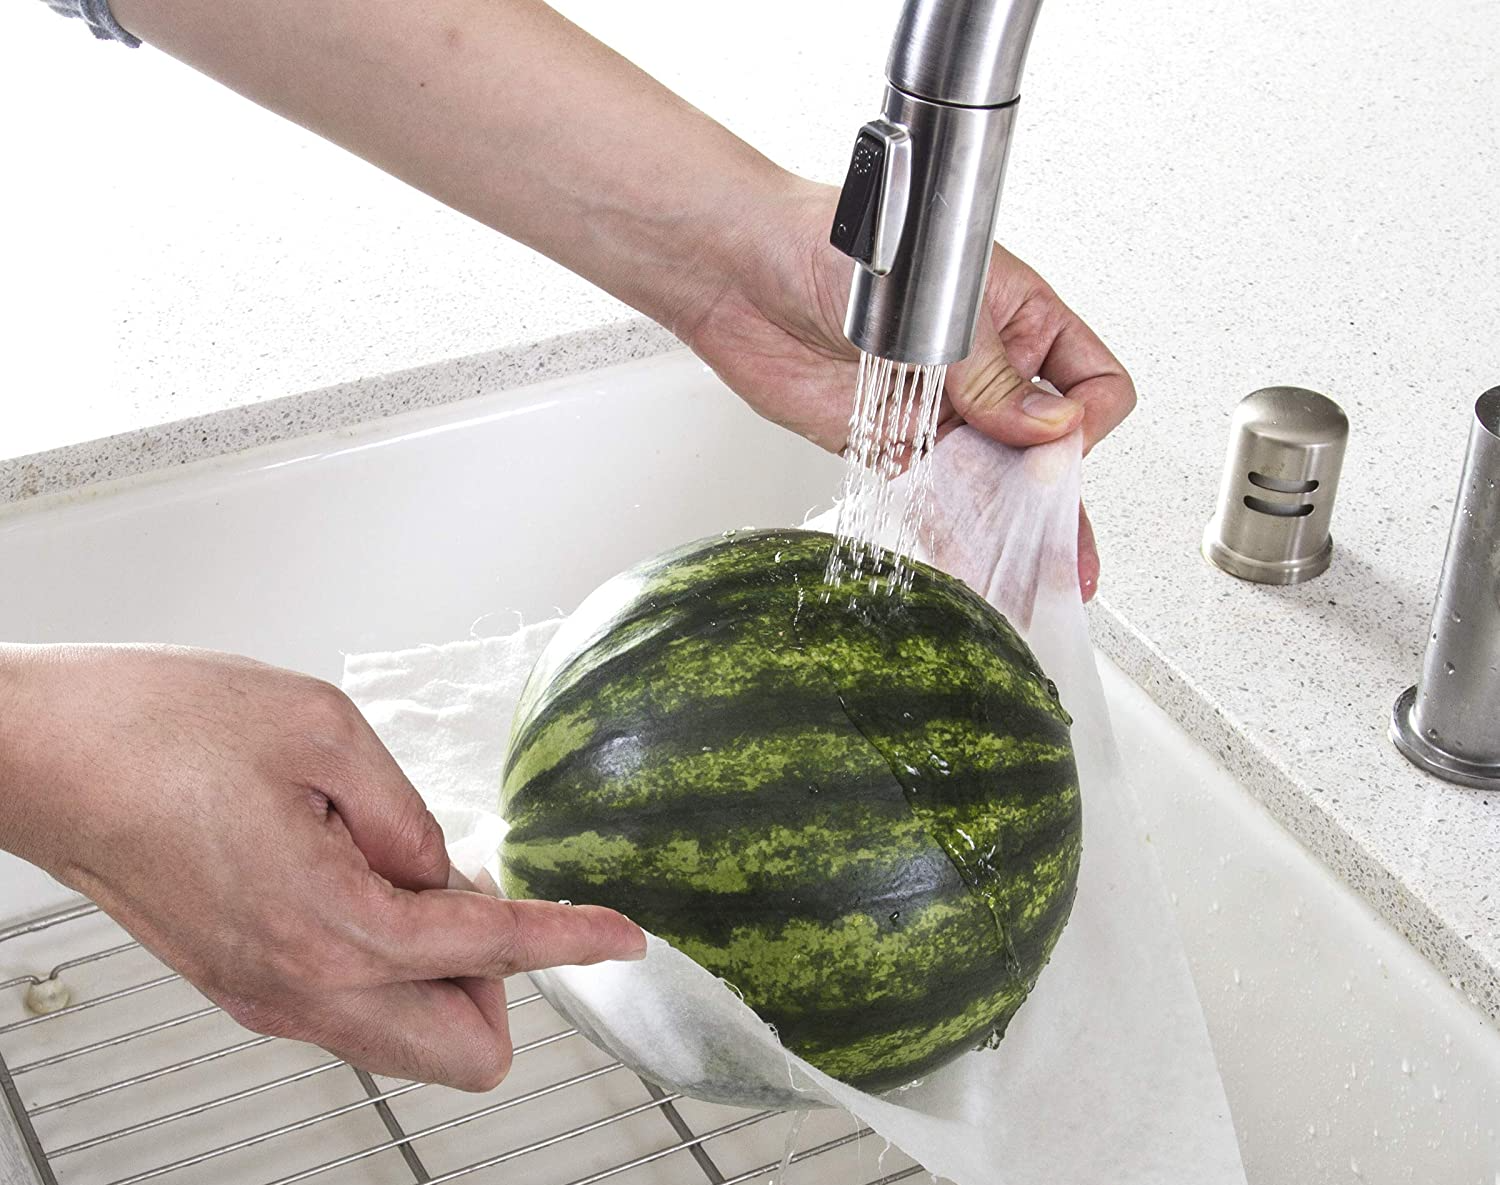 A person using a sheet from the package to hold a watermelon under a faucet